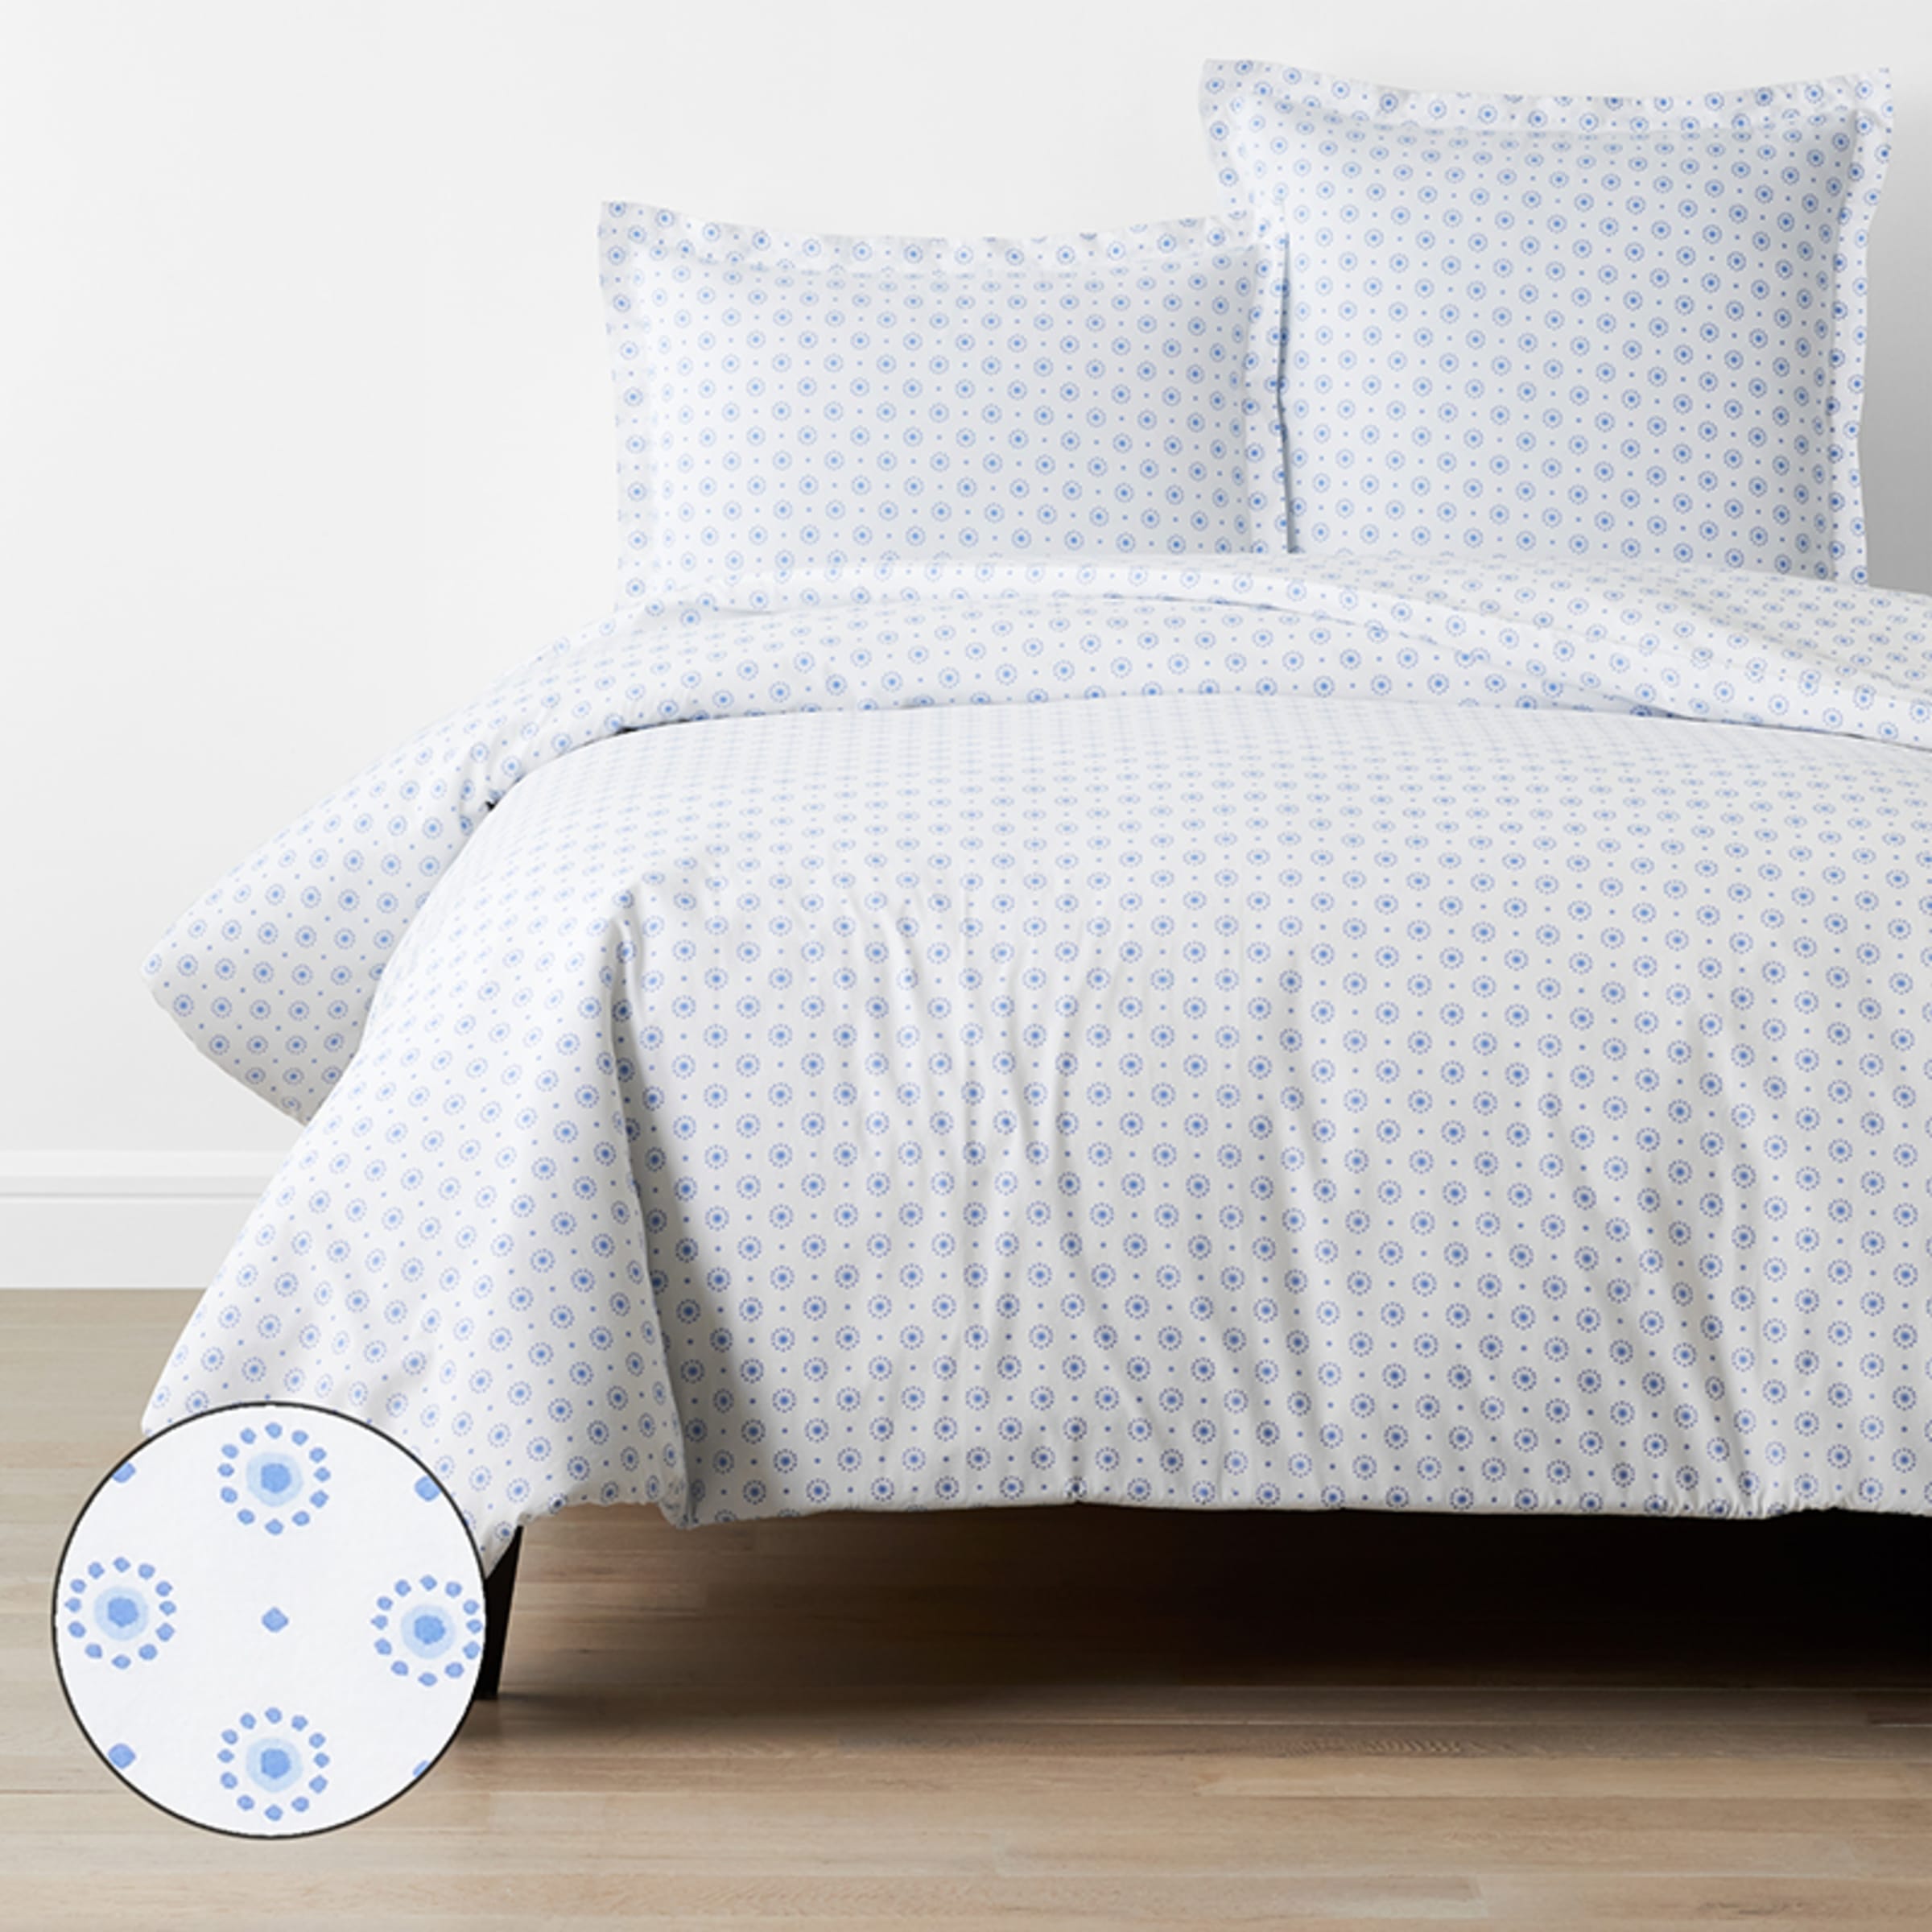 Company Organic Cotton™ Myla Garment Washed Percale Duvet Cover | The Company Store